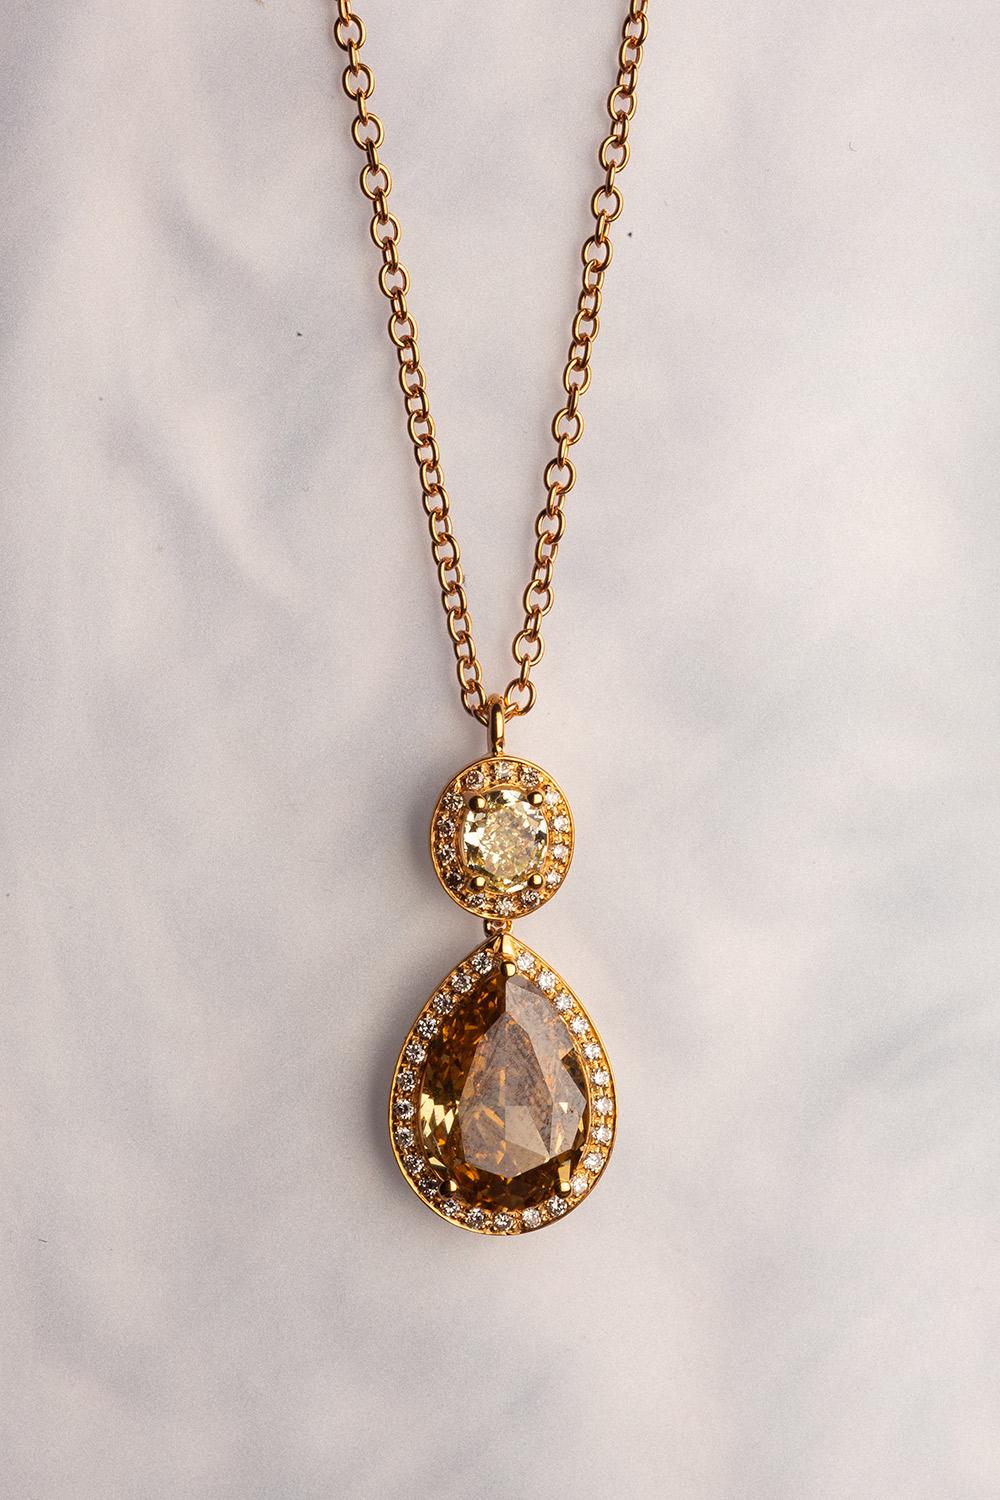 This 18K yellow gold elegant pendant is from our Divine Collection. It is made of a pear shape brown diamond in total of 2.39 Carat and oval shape yellow diamond in total of 0.42 Carat. Both diamonds are decorated by round colourless diamonds in